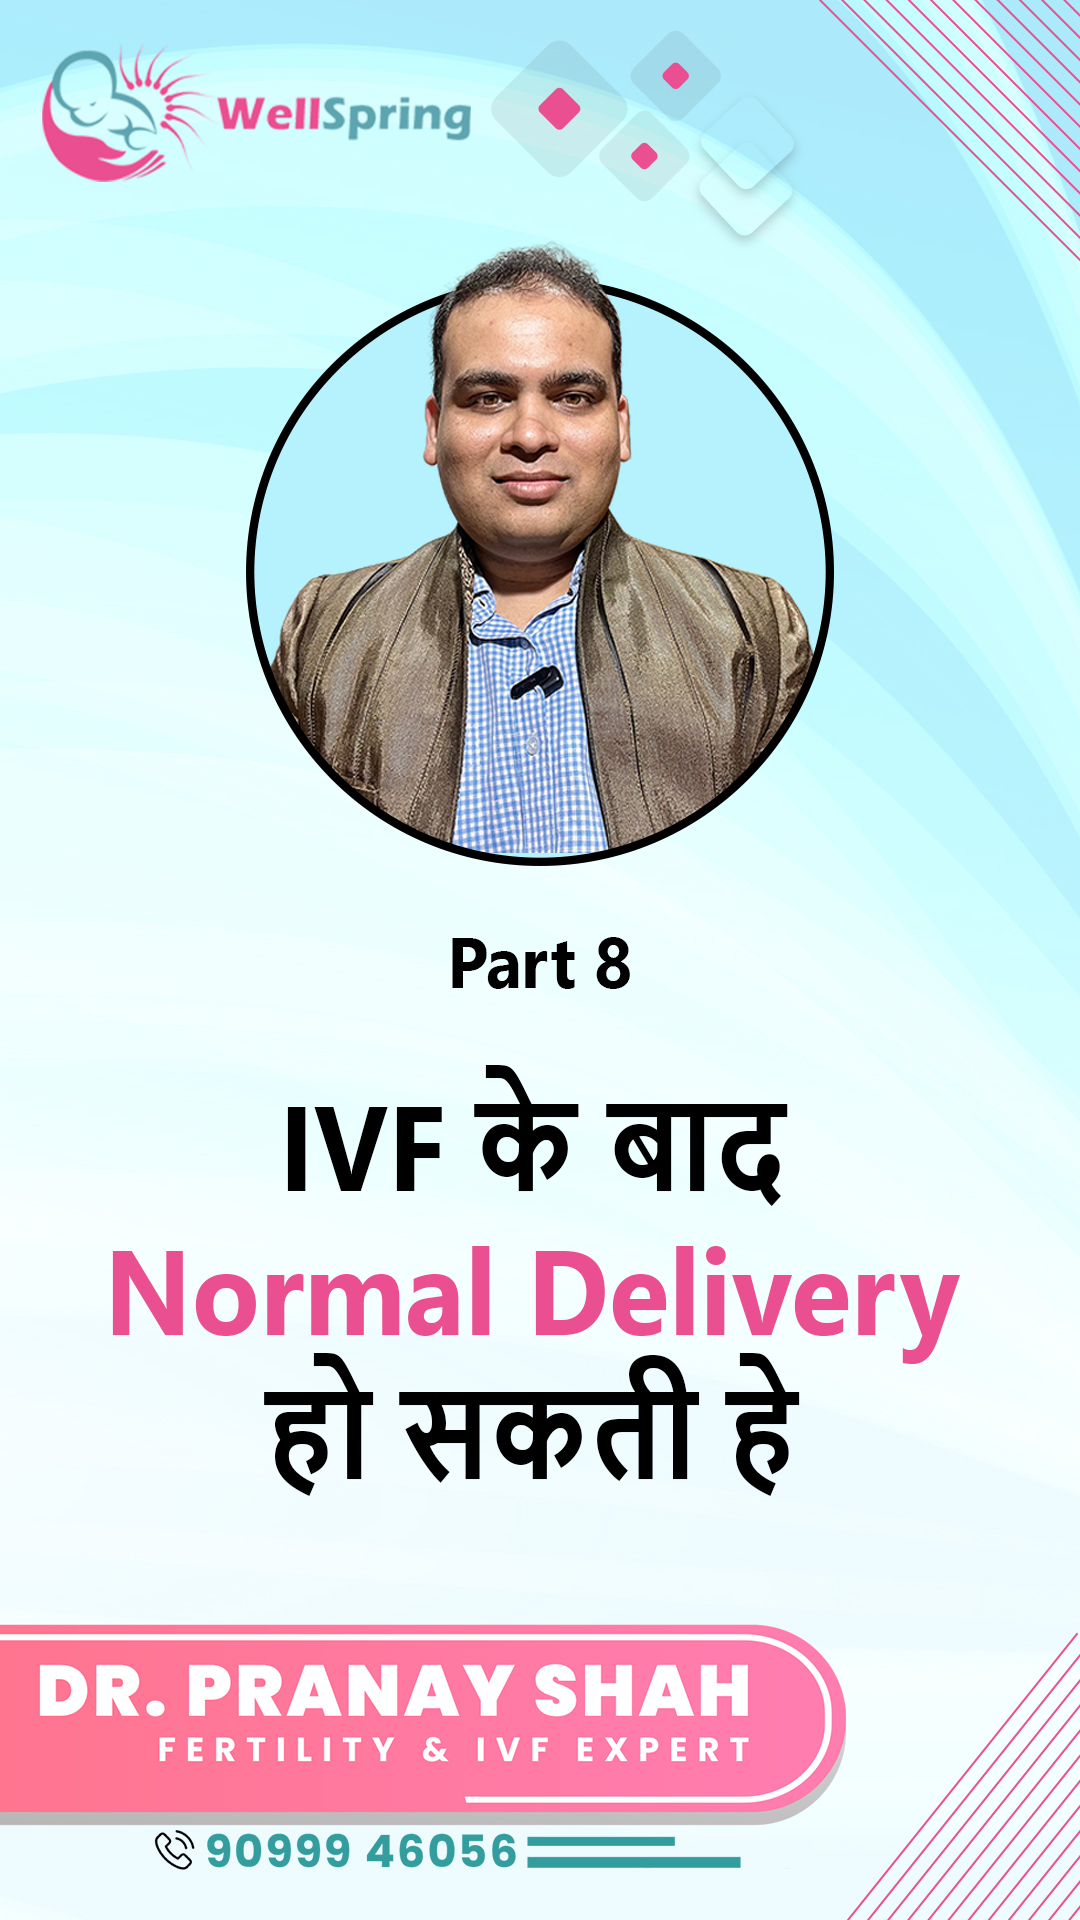 Chances of natural pregnancy after IVF conception – Part 08